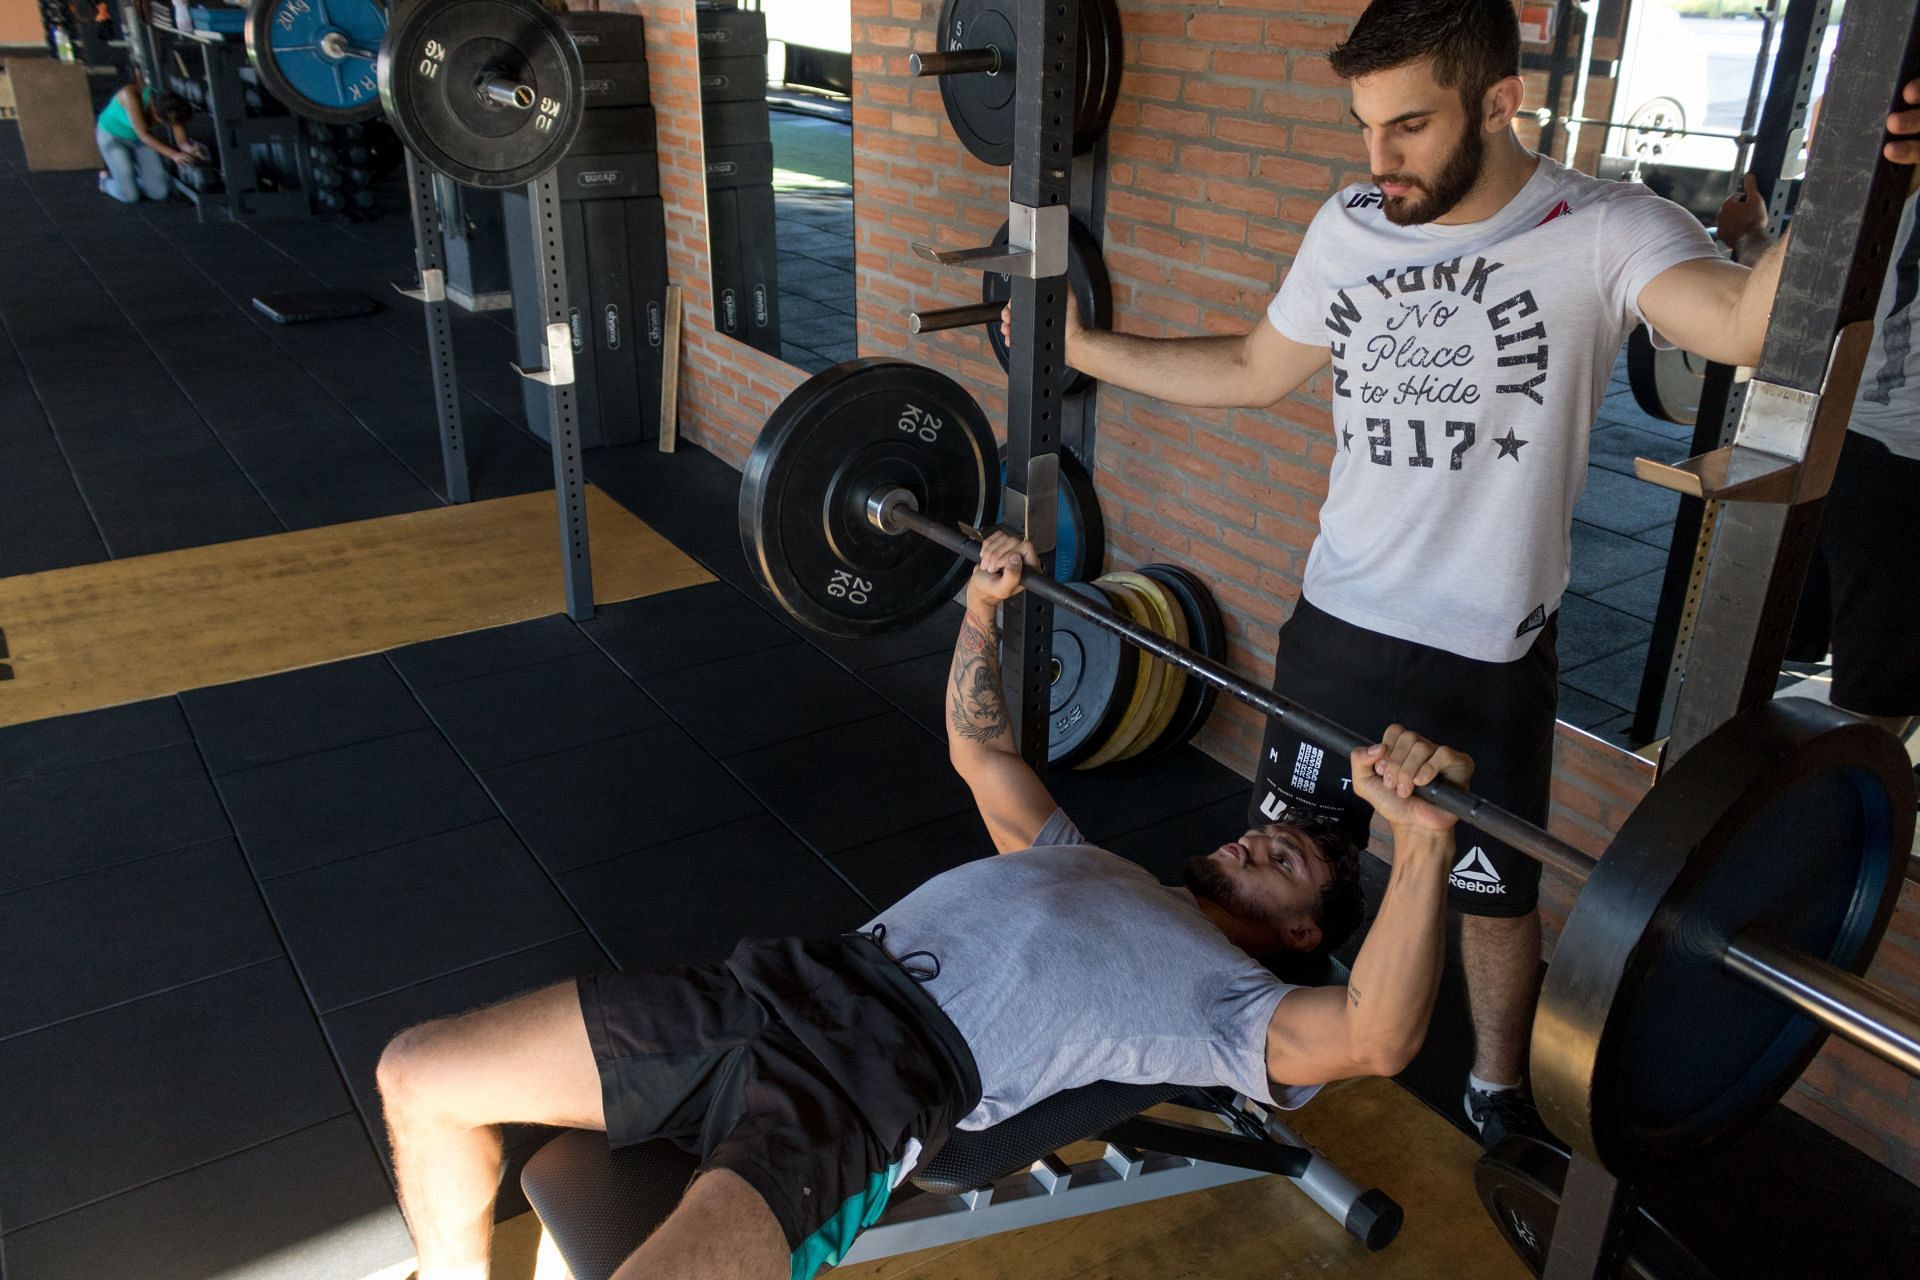 Bench press can be performed by lying down or standing. (Image via Pexels/Bruni Bueno)